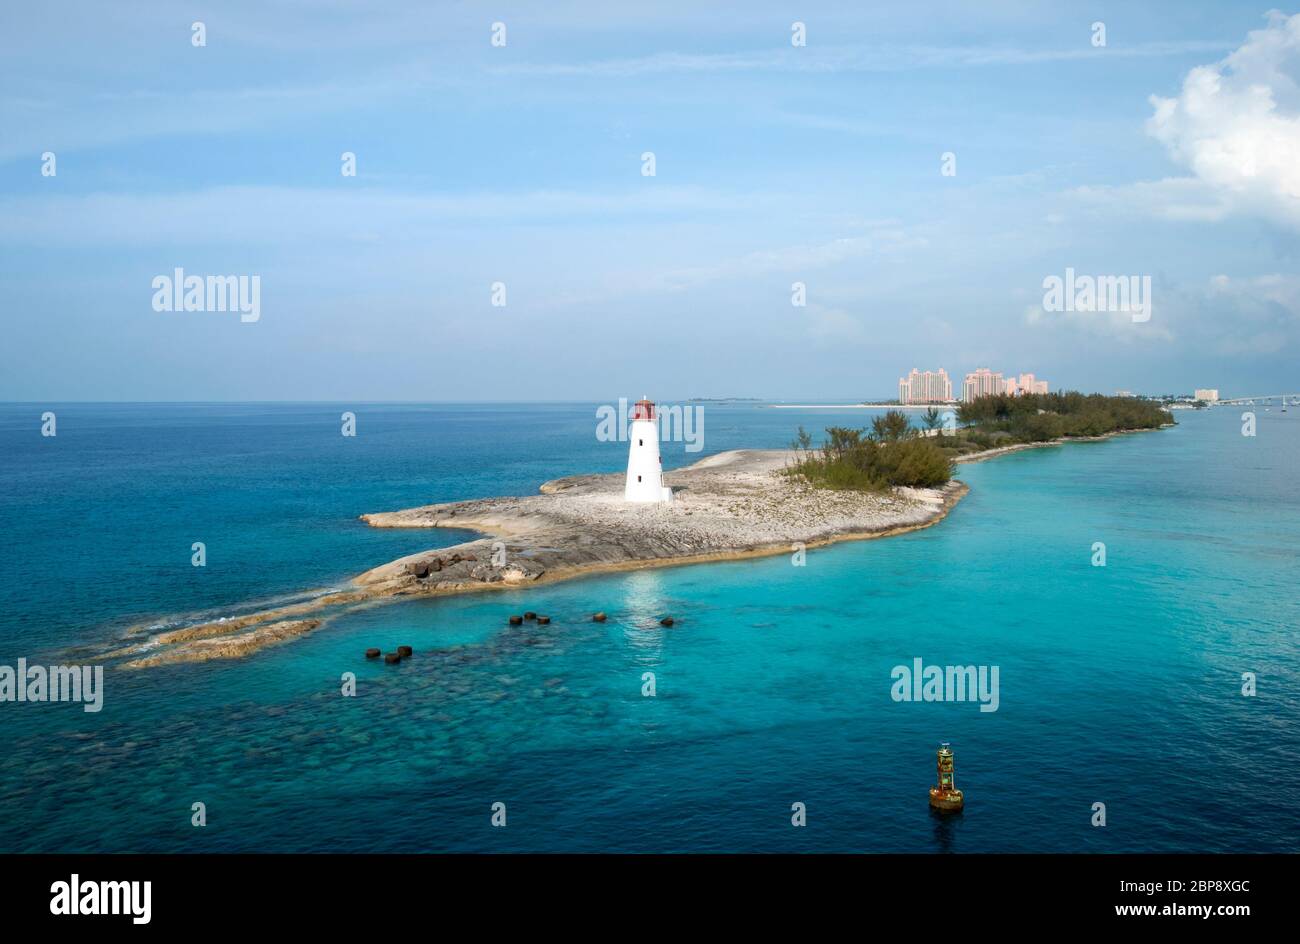 The late afternoon view of Paradise Island narrow landscape with a lighthouse (Bahamas). Stock Photo